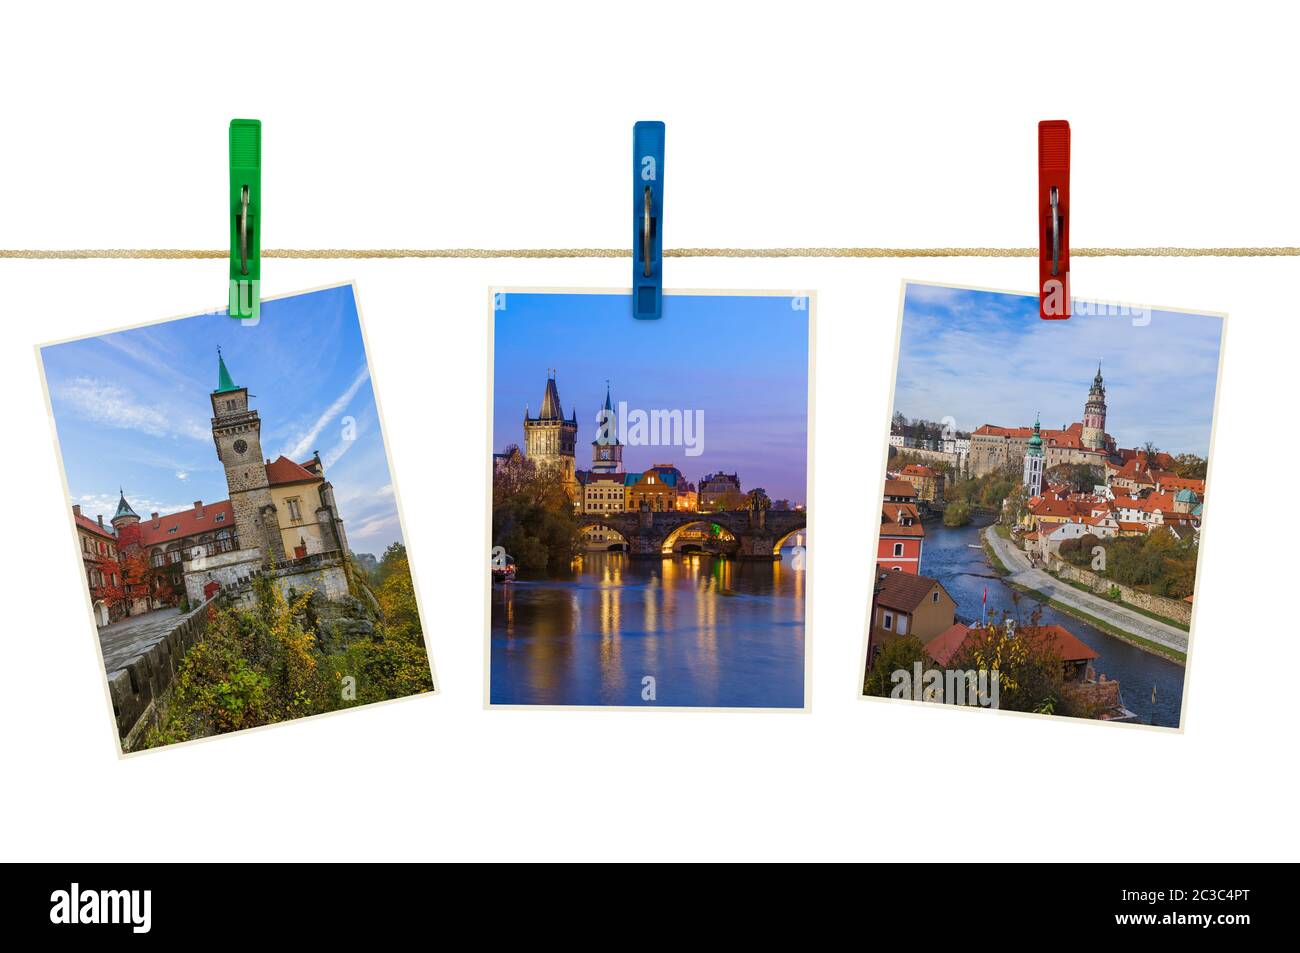 Czech republic images (my photos) on clothespins Stock Photo